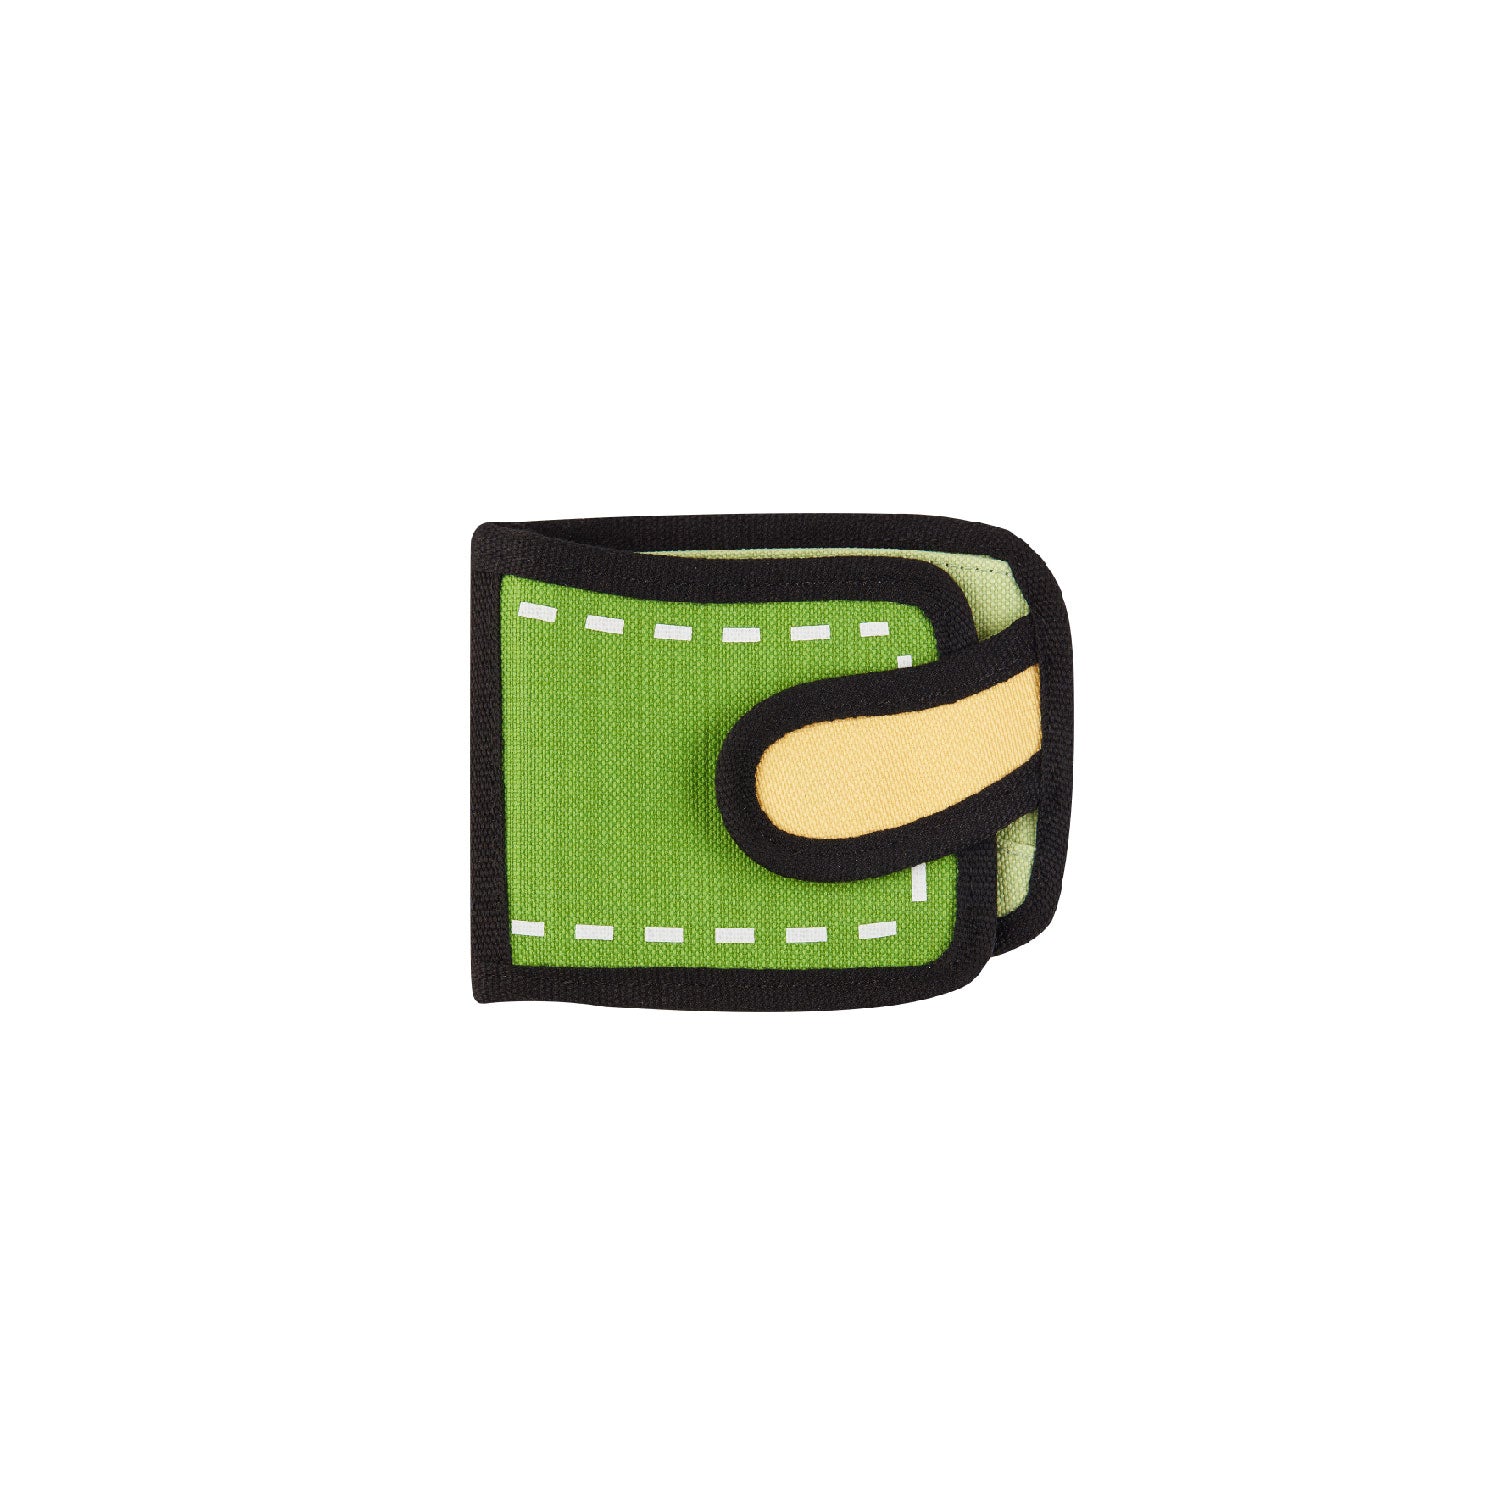 Poketto Greenery Wallet - JumpFromPaper